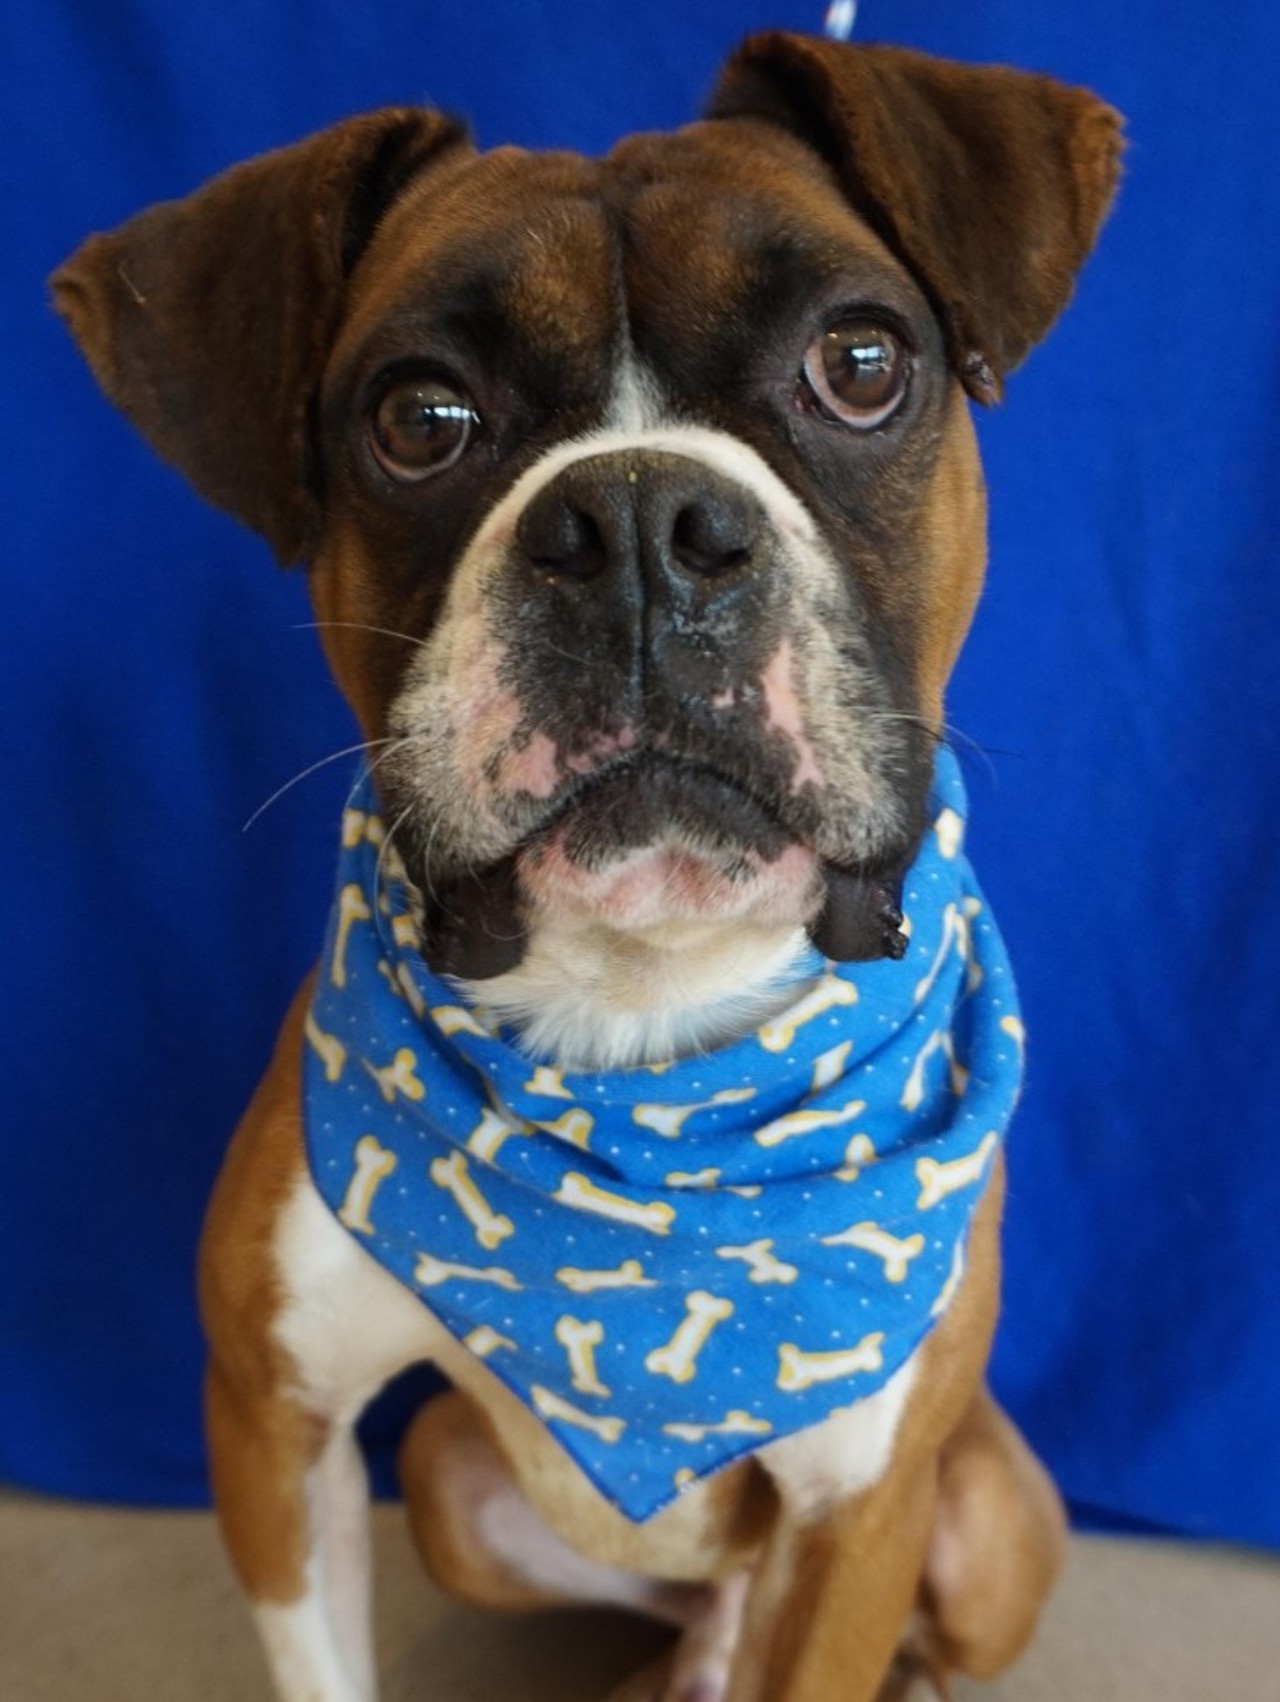 NAME: Ali
GENDER: Male
BREED: Boxer
AGE: 2 years 
WEIGHT: 38 pounds
SPECIAL CONSIDERATIONS: Layla (mother) and Ali (son) are a &#147;bonded pair&#148;, meaning they must be adopted together.
REASON I CAME TO MHS: Owner surrender
LOCATION: Rochester Hills Center for Animal Care
ID NUMBER: 872824